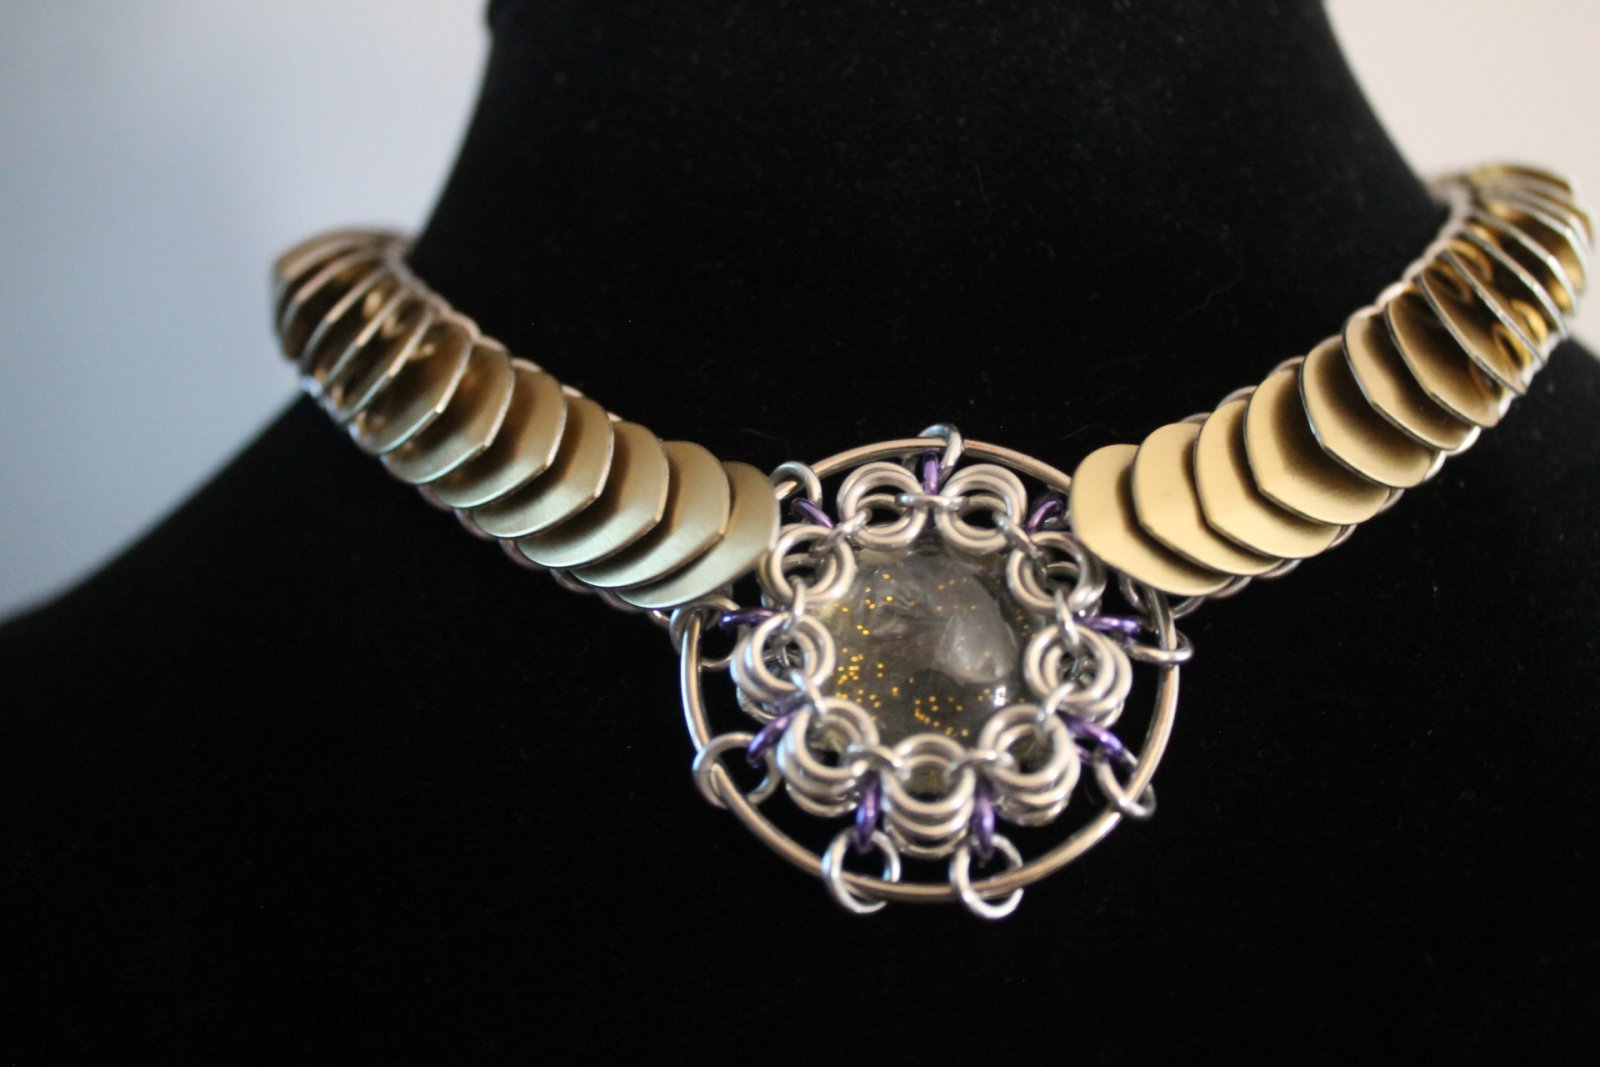 Scale/Maille wrapped pendant Choker